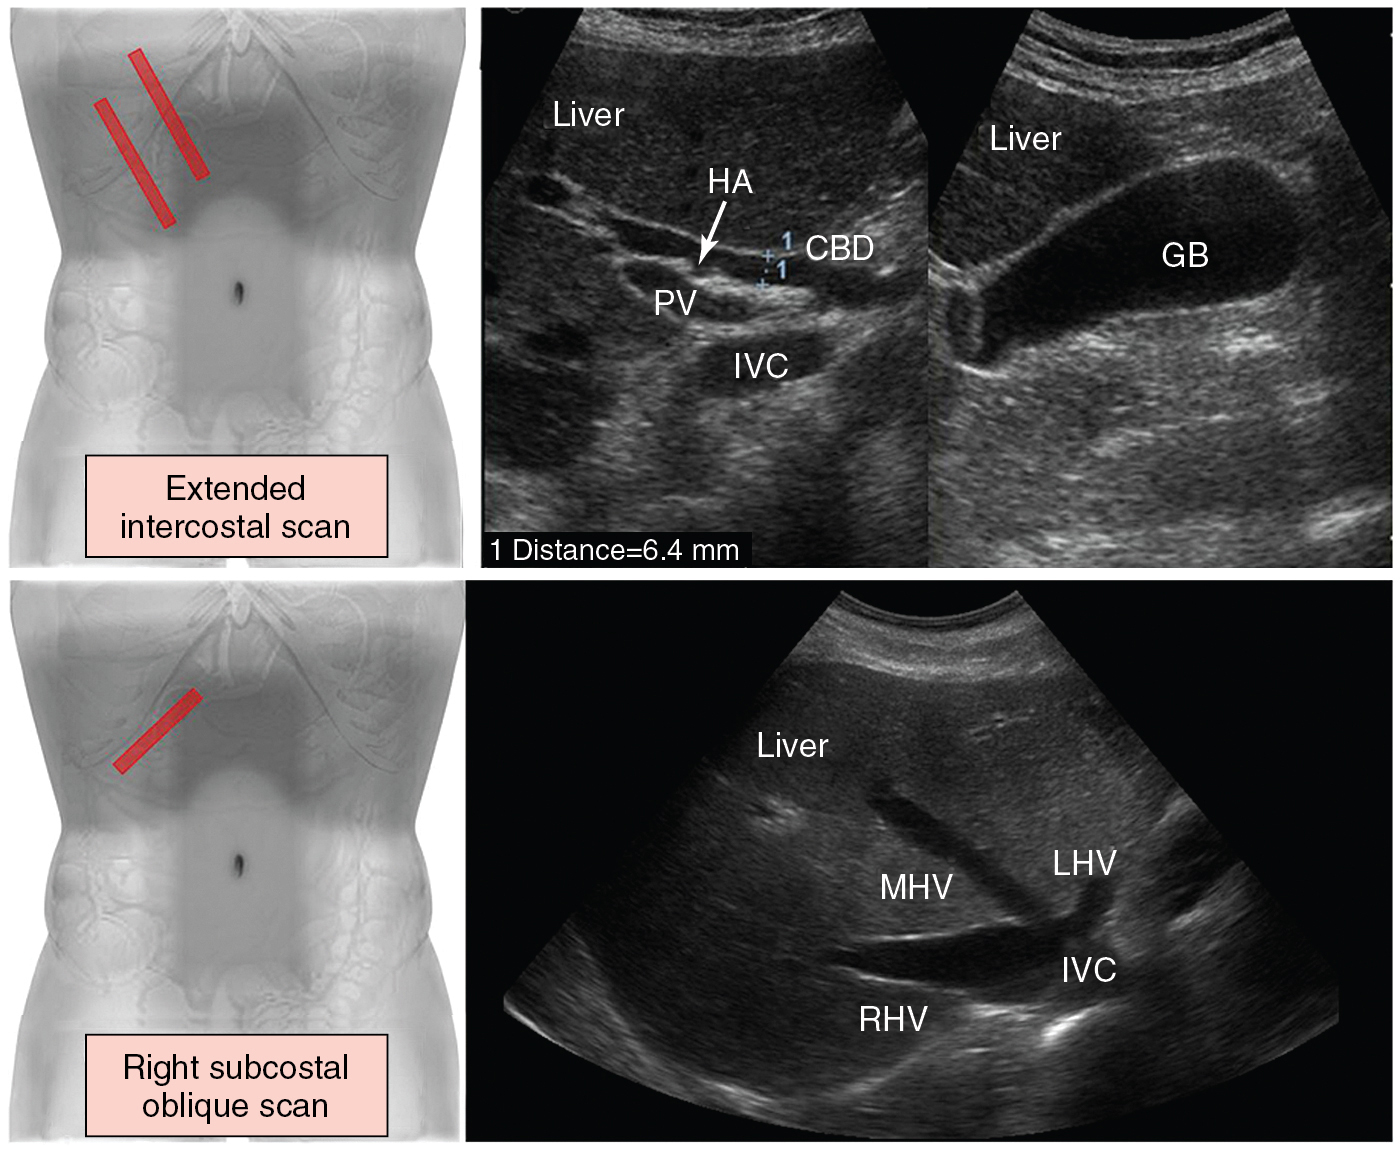 Figure 41 E-2, ( Top ) Extended intercostal scan. The transducer is oriented longitudinally and lateral to the midline in an intercostal space or below the costal arch. In the porta hepatis, the common bile duct (CBD) is depicted between the portal vein (PV) and the hepatic artery (HA). Including the inferior vena cava (IVC), the three tubular structures (CBD, PV, HA) are described as the “parallel channel sign” ( left ). Scanning can be advanced in the same direction along the costal arch to define the gallbladder (GB) in longitudinal section ( right ). ( Bottom ) Right subcostal oblique scan. The transducer is placed below the right costal arch in a slightly cephalad angulation. The hepatic veins ( LHV , Left hepatic vein, MHV , middle hepatic vein, RHV , right hepatic vein) are depicted as they empty into the IVC just beneath the right side of the diaphragm.